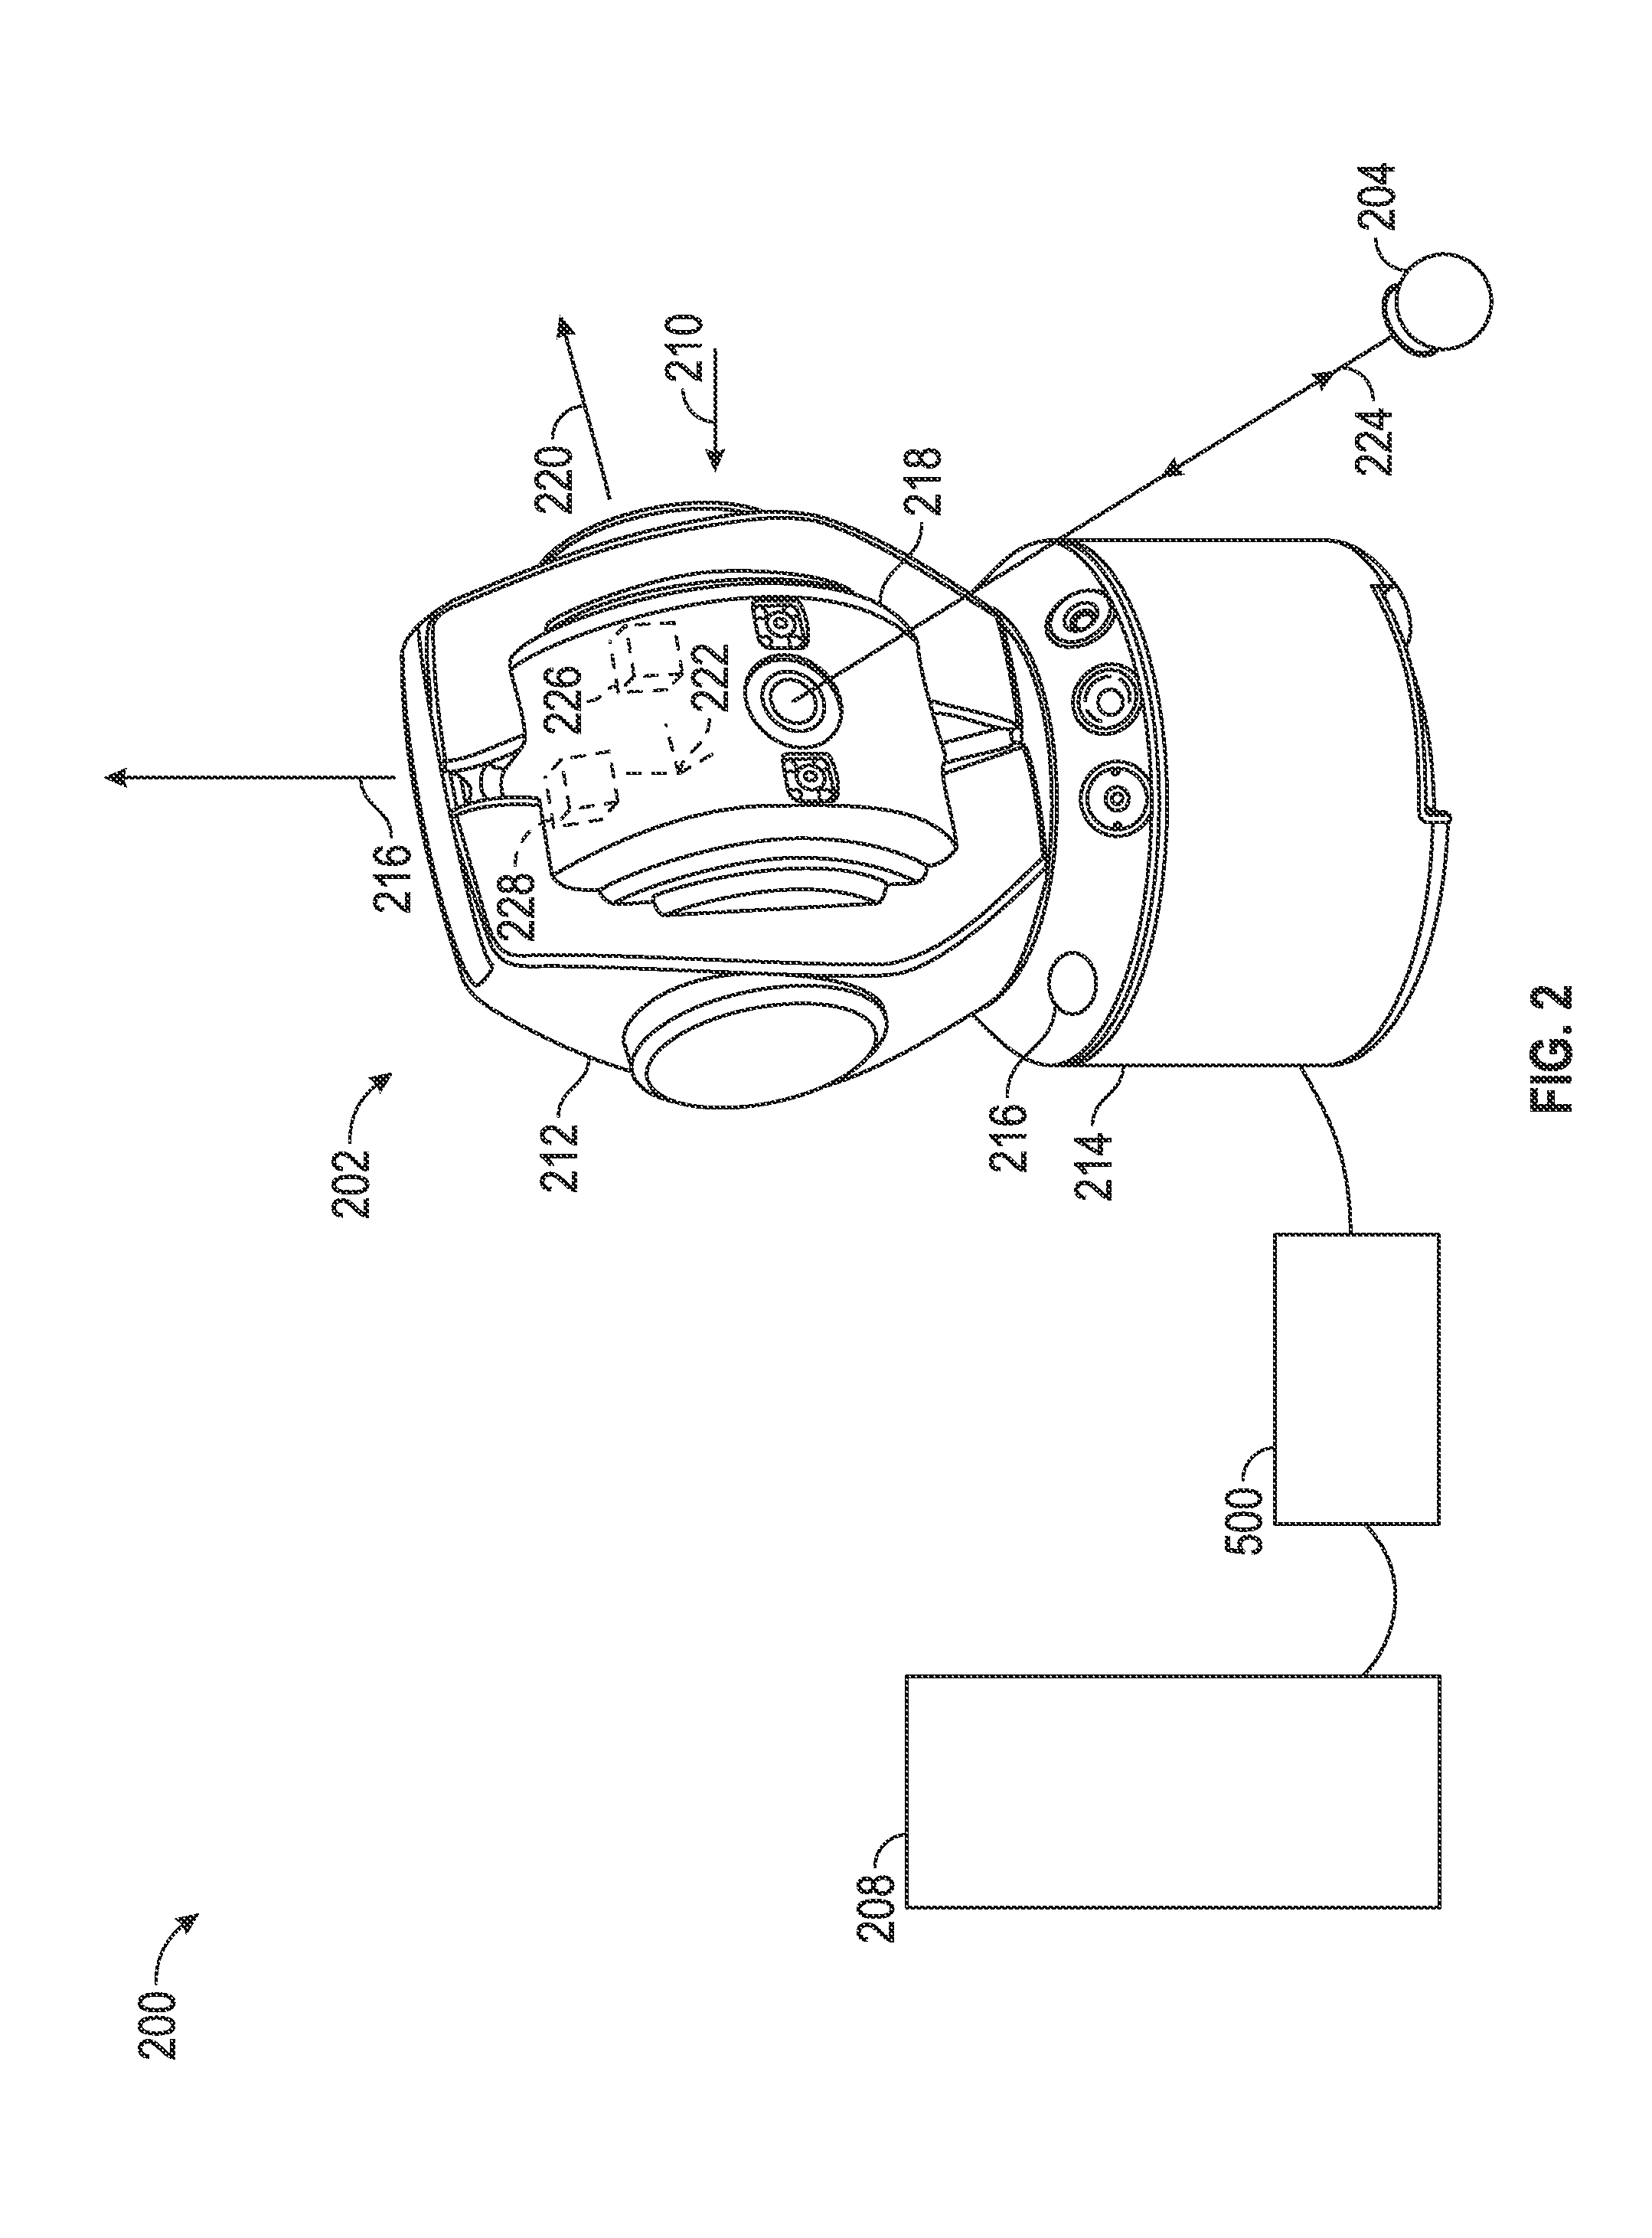 Metrology device and method of servicing